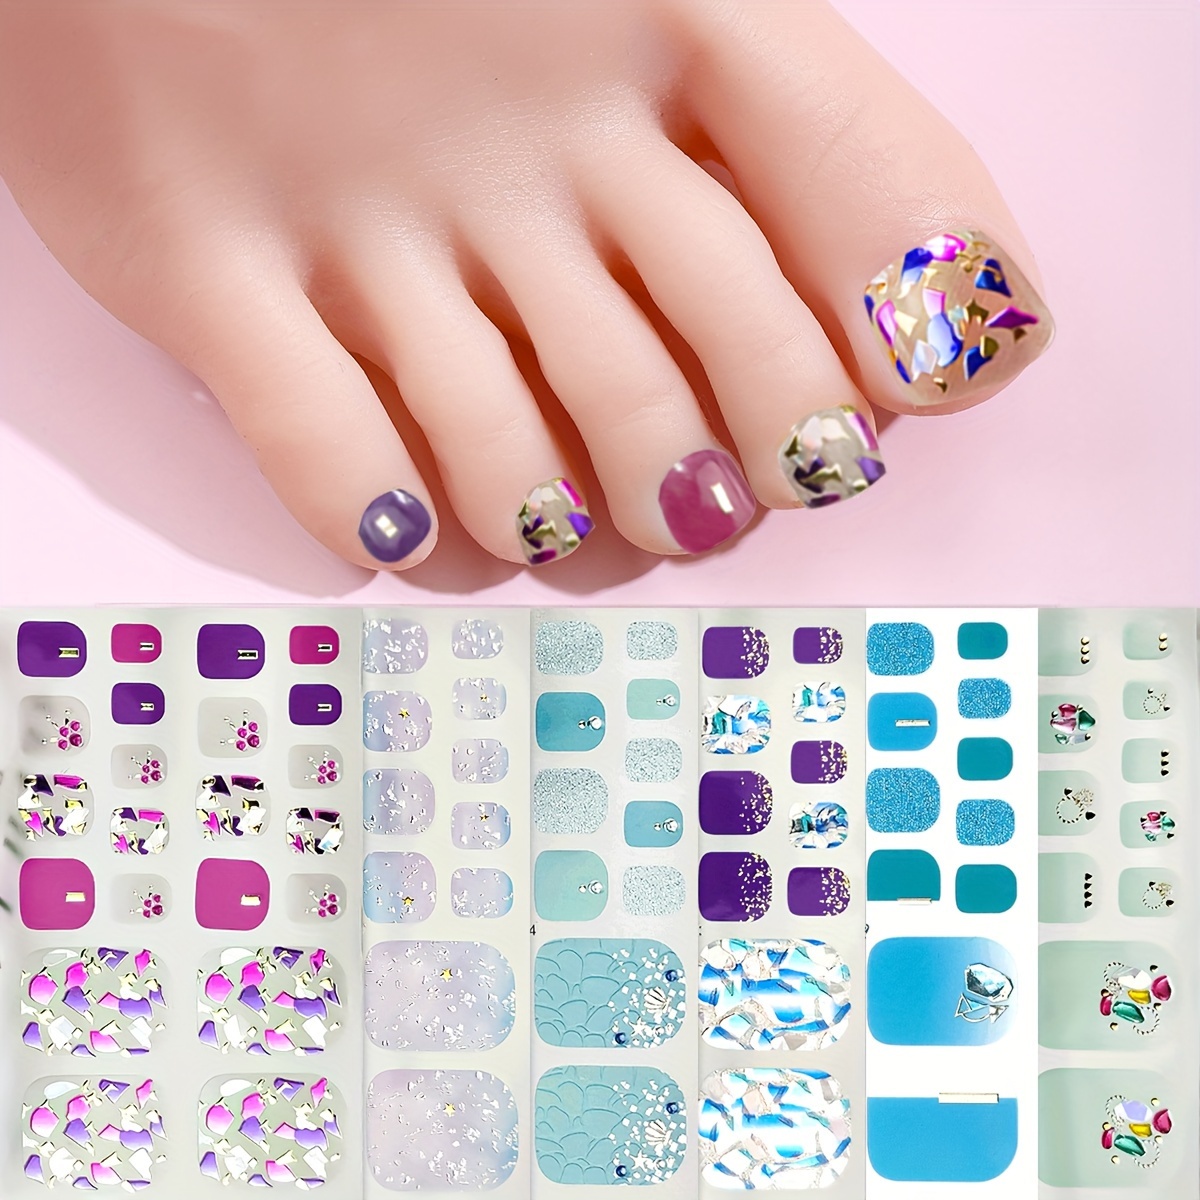 

6 Sheets Of 3d Toe Nail Strips: Spring/summer Y2k Gorgeous Gemstone Toe Nail Wraps With 2 Nail Files For Women And Girls Traveling Quick Manicure